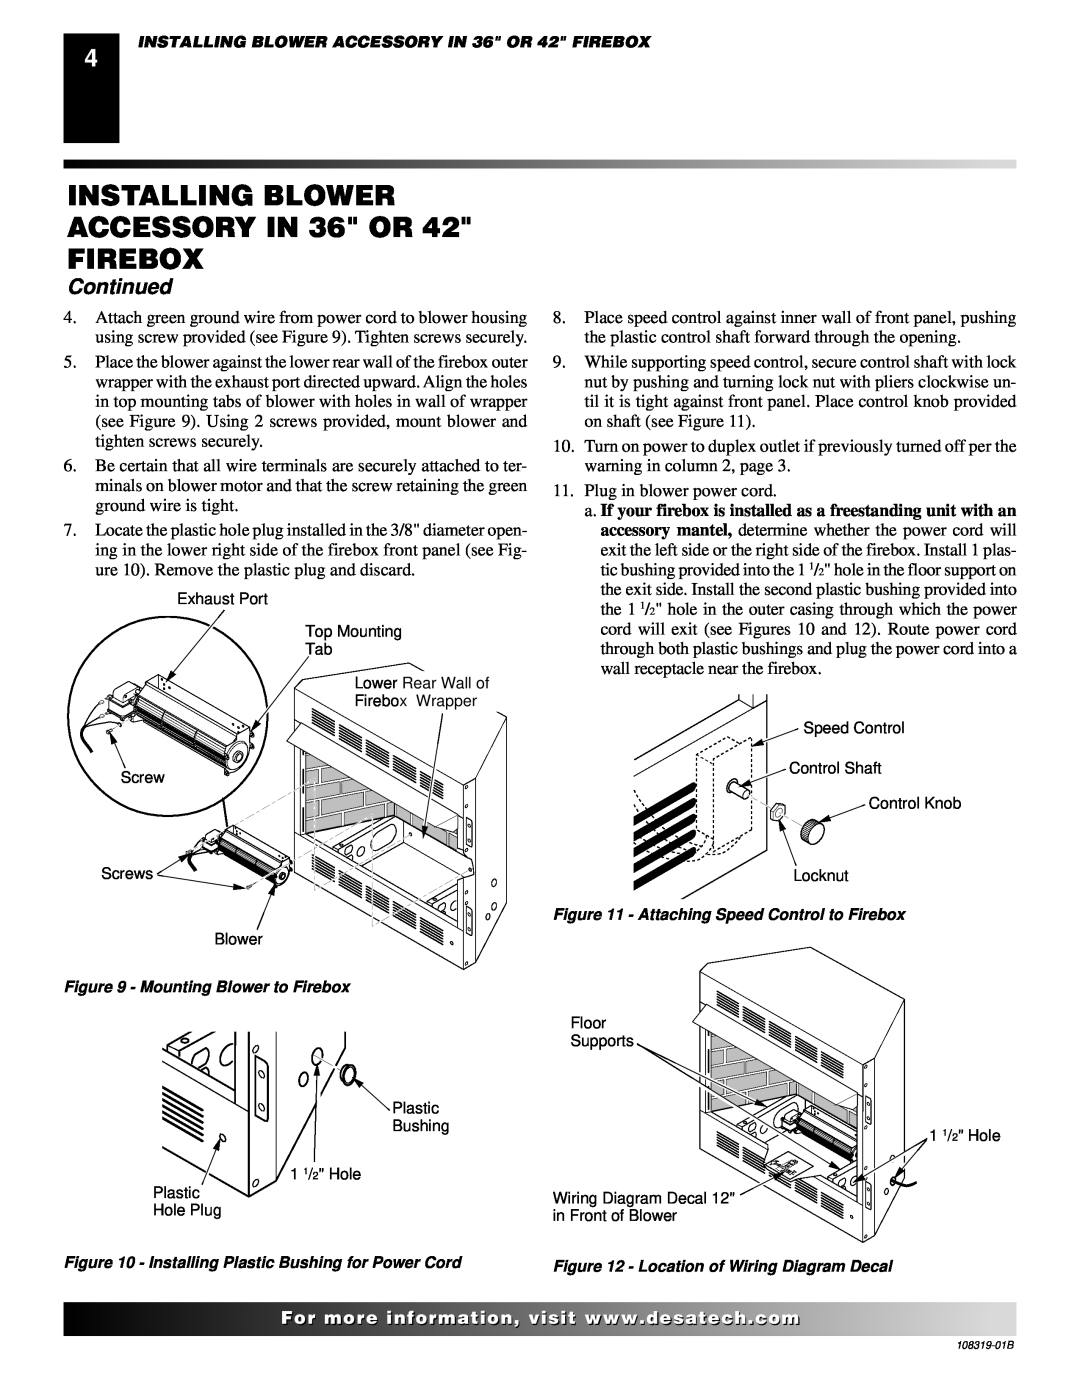 Desa Ga3750a installation instructions INSTALLING BLOWER ACCESSORY IN 36 OR FIREBOX, Continued, Plug in blower power cord 